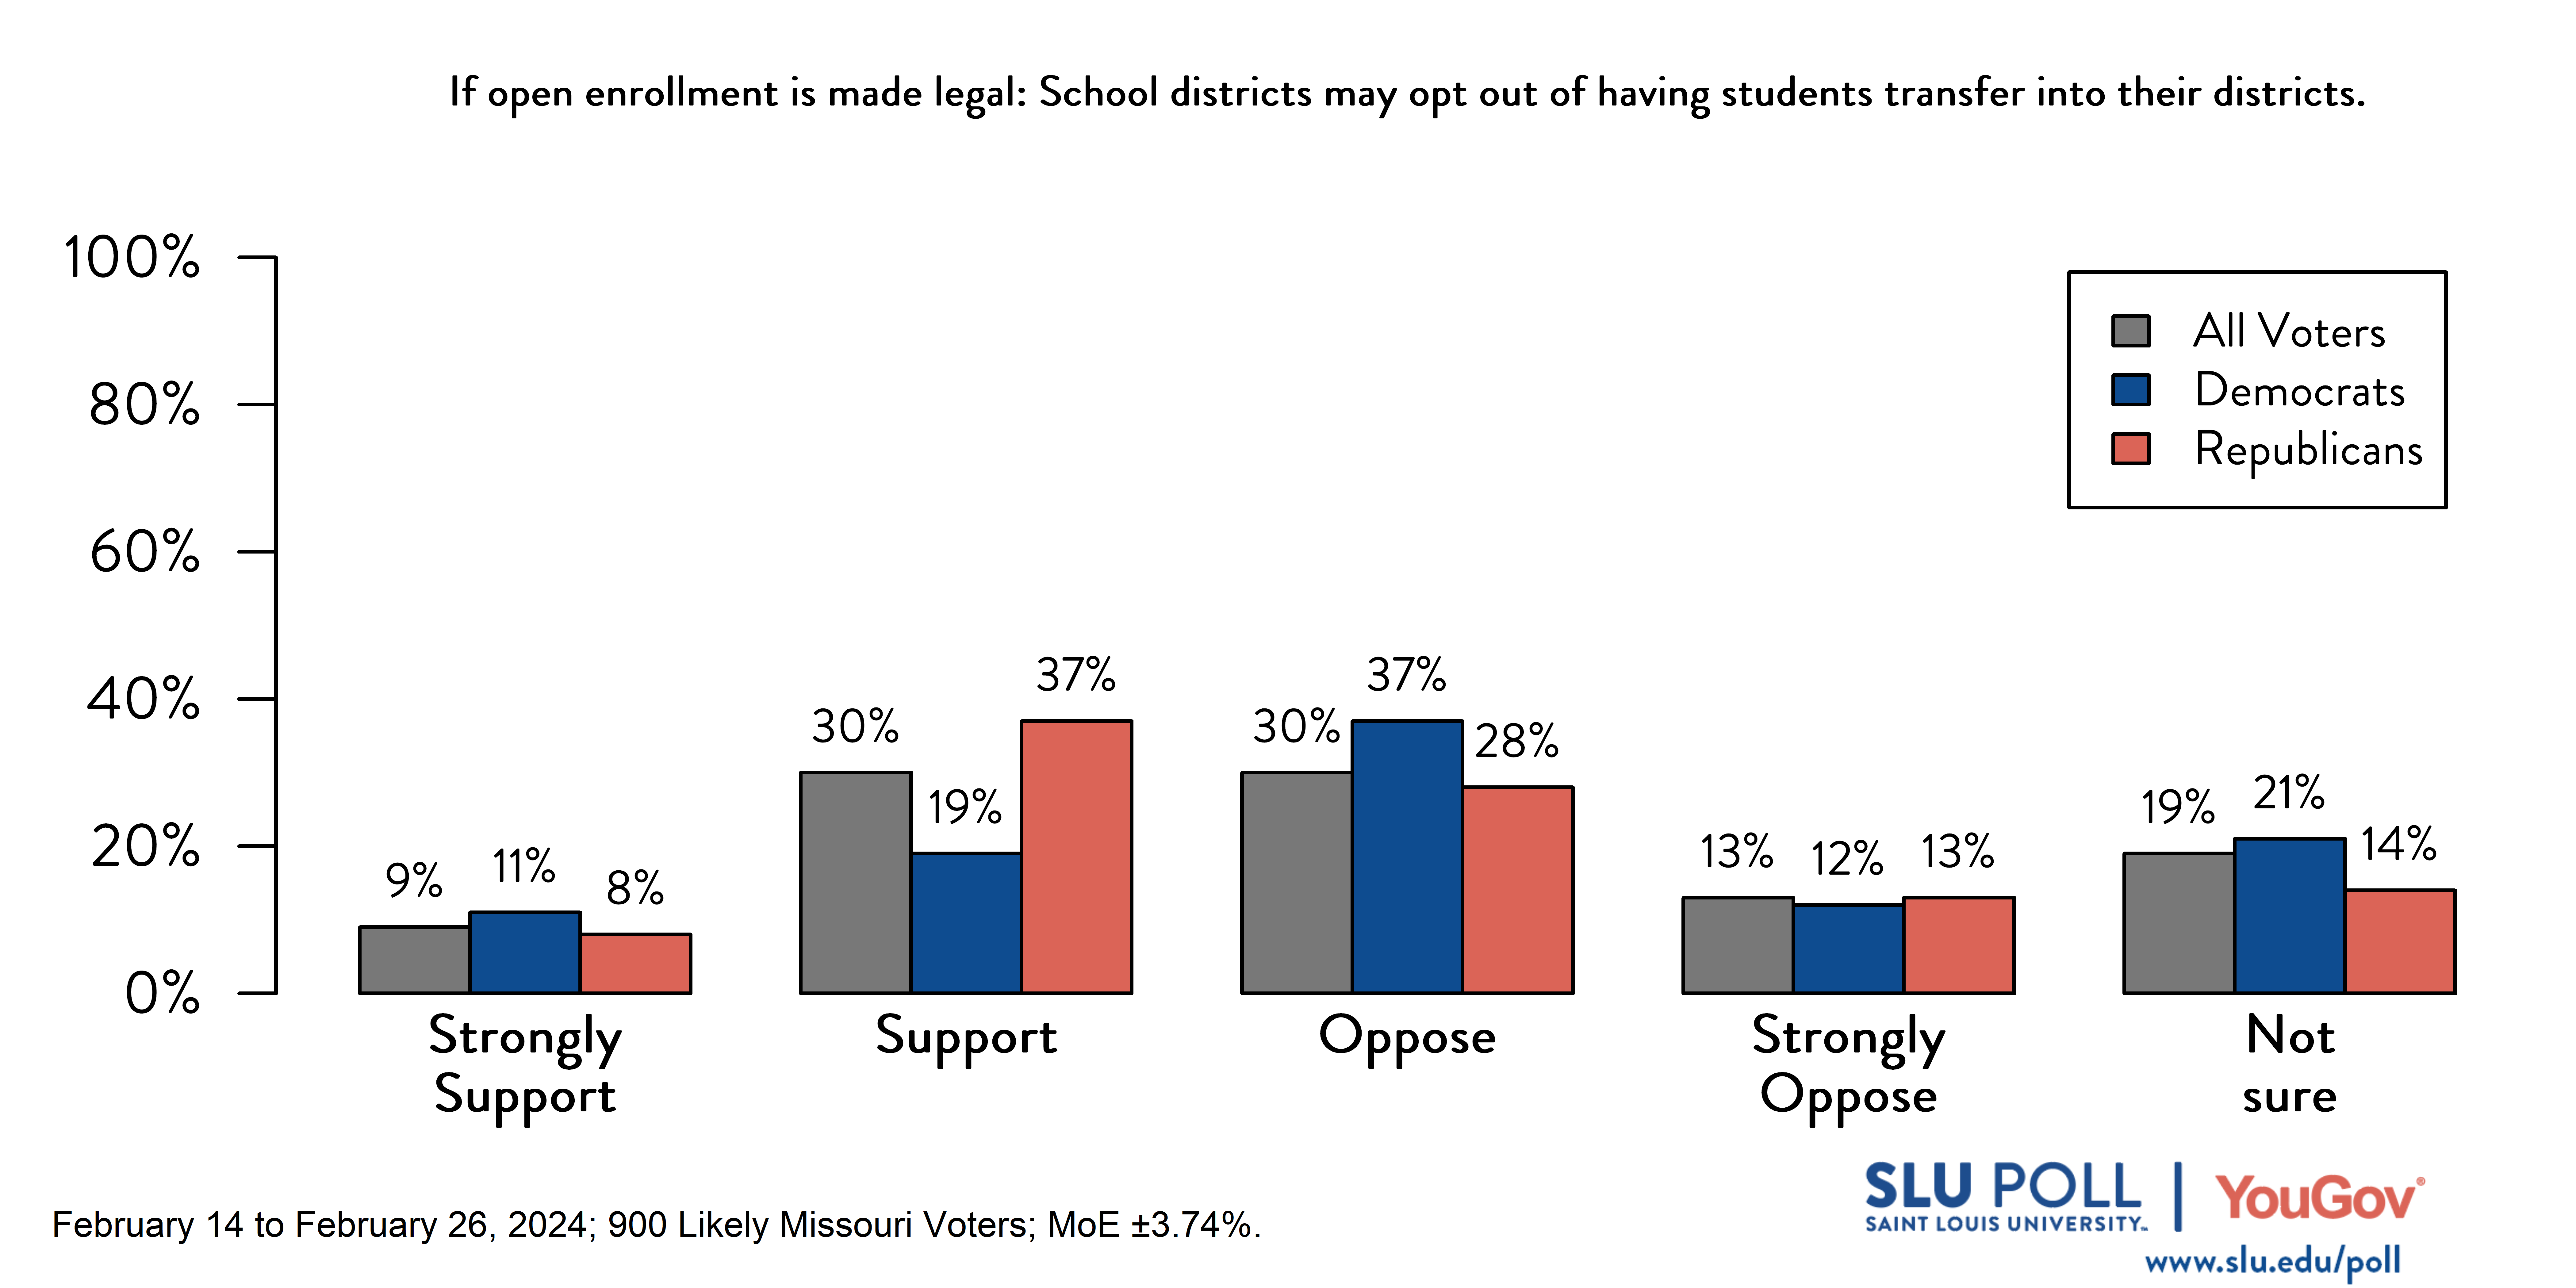 Likely voters' responses to 'If Missouri allows students to enroll in public schools outside their residential school districts (that is, the district where they live), indicate whether you support or oppose the following…School districts may opt out of having students transfer into their districts?': 9% Strongly support, 30% Support, 30% Oppose, 13% Strongly oppose, and 19% Not sure. Democratic voters' responses: ' 11% Strongly support, 19% Support, 37% Oppose, 12% Strongly oppose, and 21% Not sure. Republican voters' responses:  8% Strongly support, 37% Support, 28% Oppose, 13% Strongly oppose, and 14% Not sure.